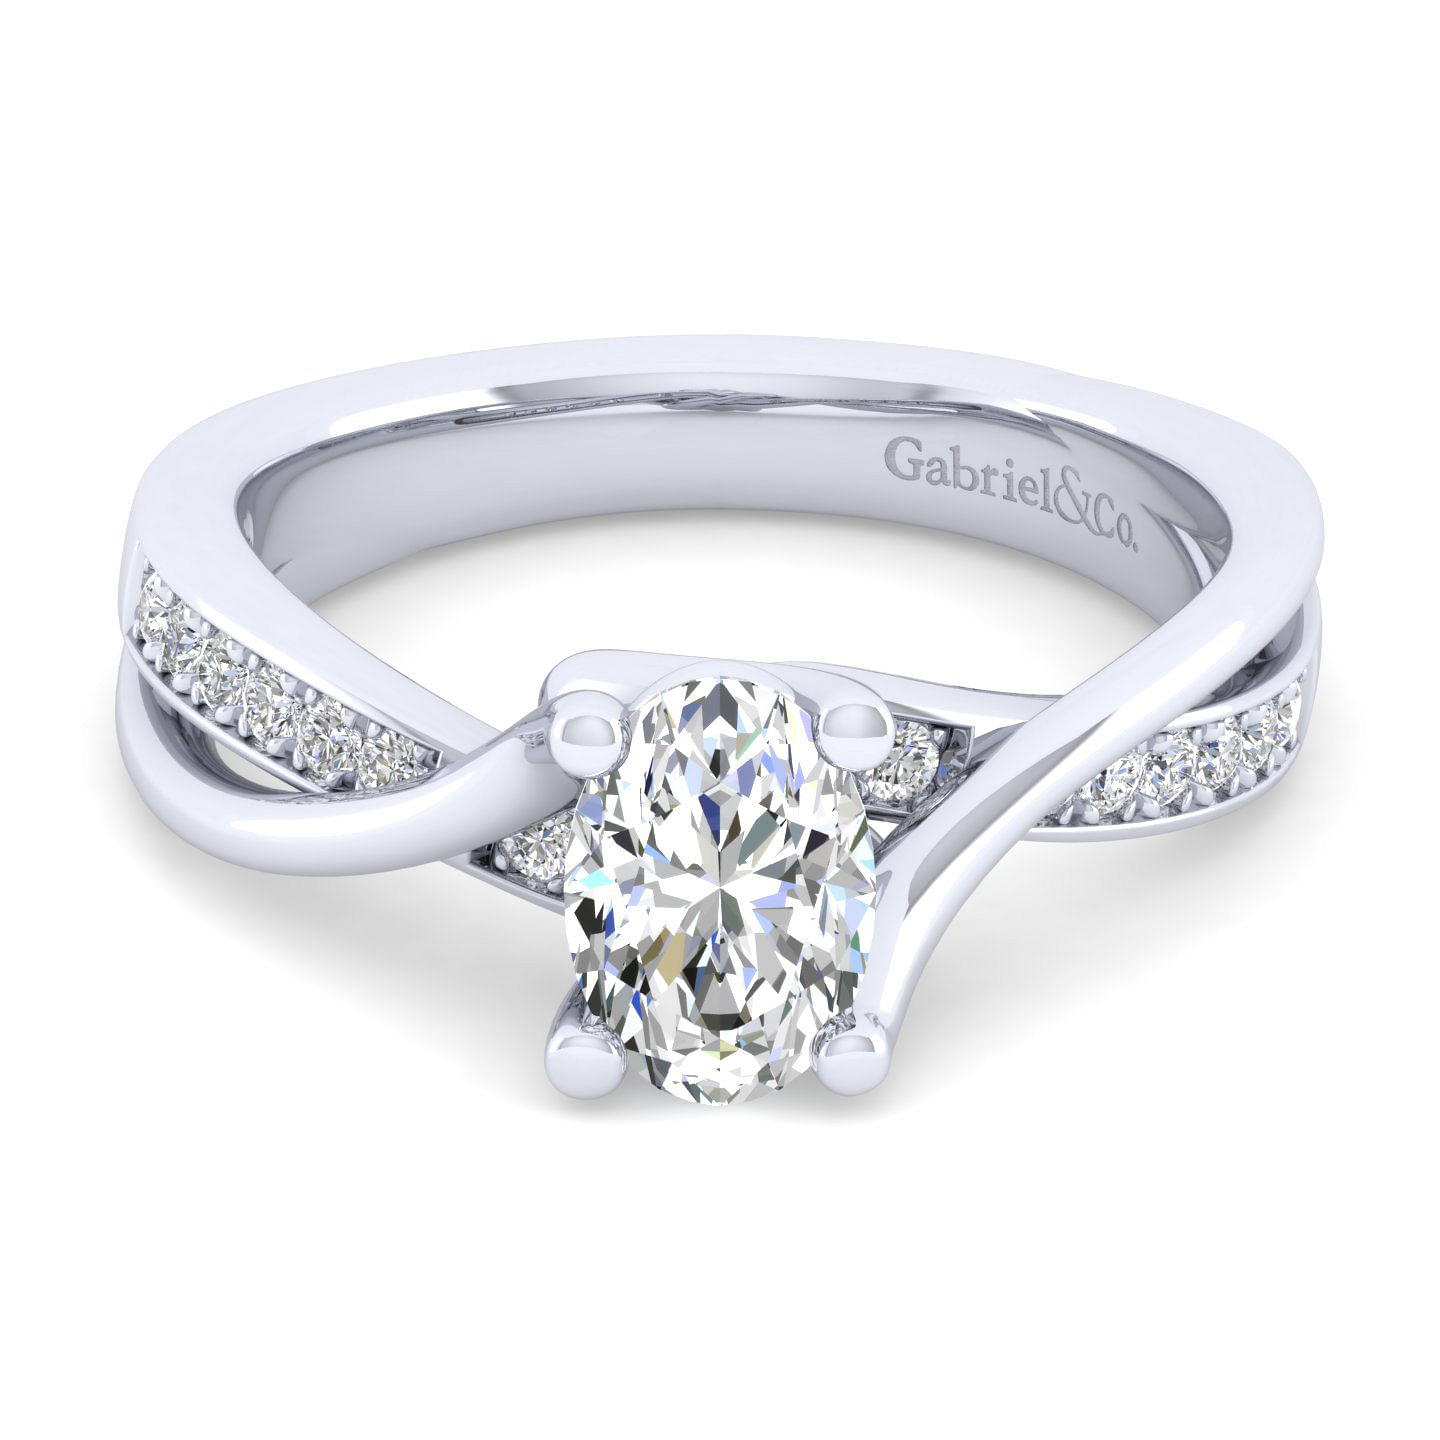 Aleesa - 14K White Gold Twisted Oval Diamond Engagement Ring